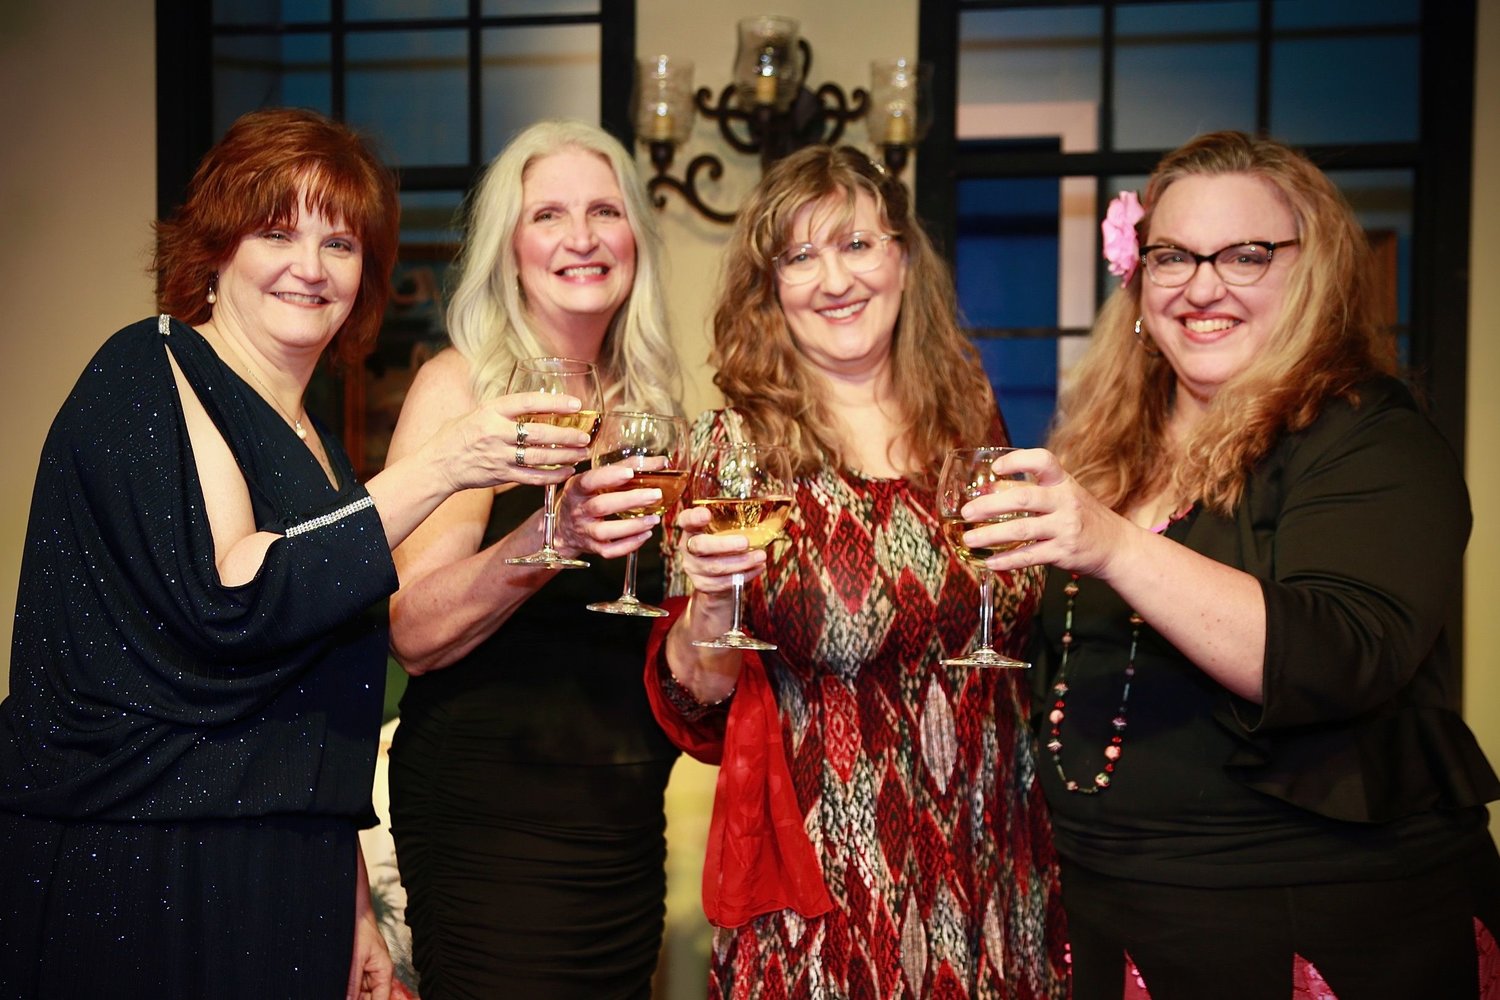 From left are: Sandra Landers Turner, Linda Friday, Heiki Lara Nyce, Heidi Murphy, starring in “The Savannah Sipping Society,” at DCP Theatre.